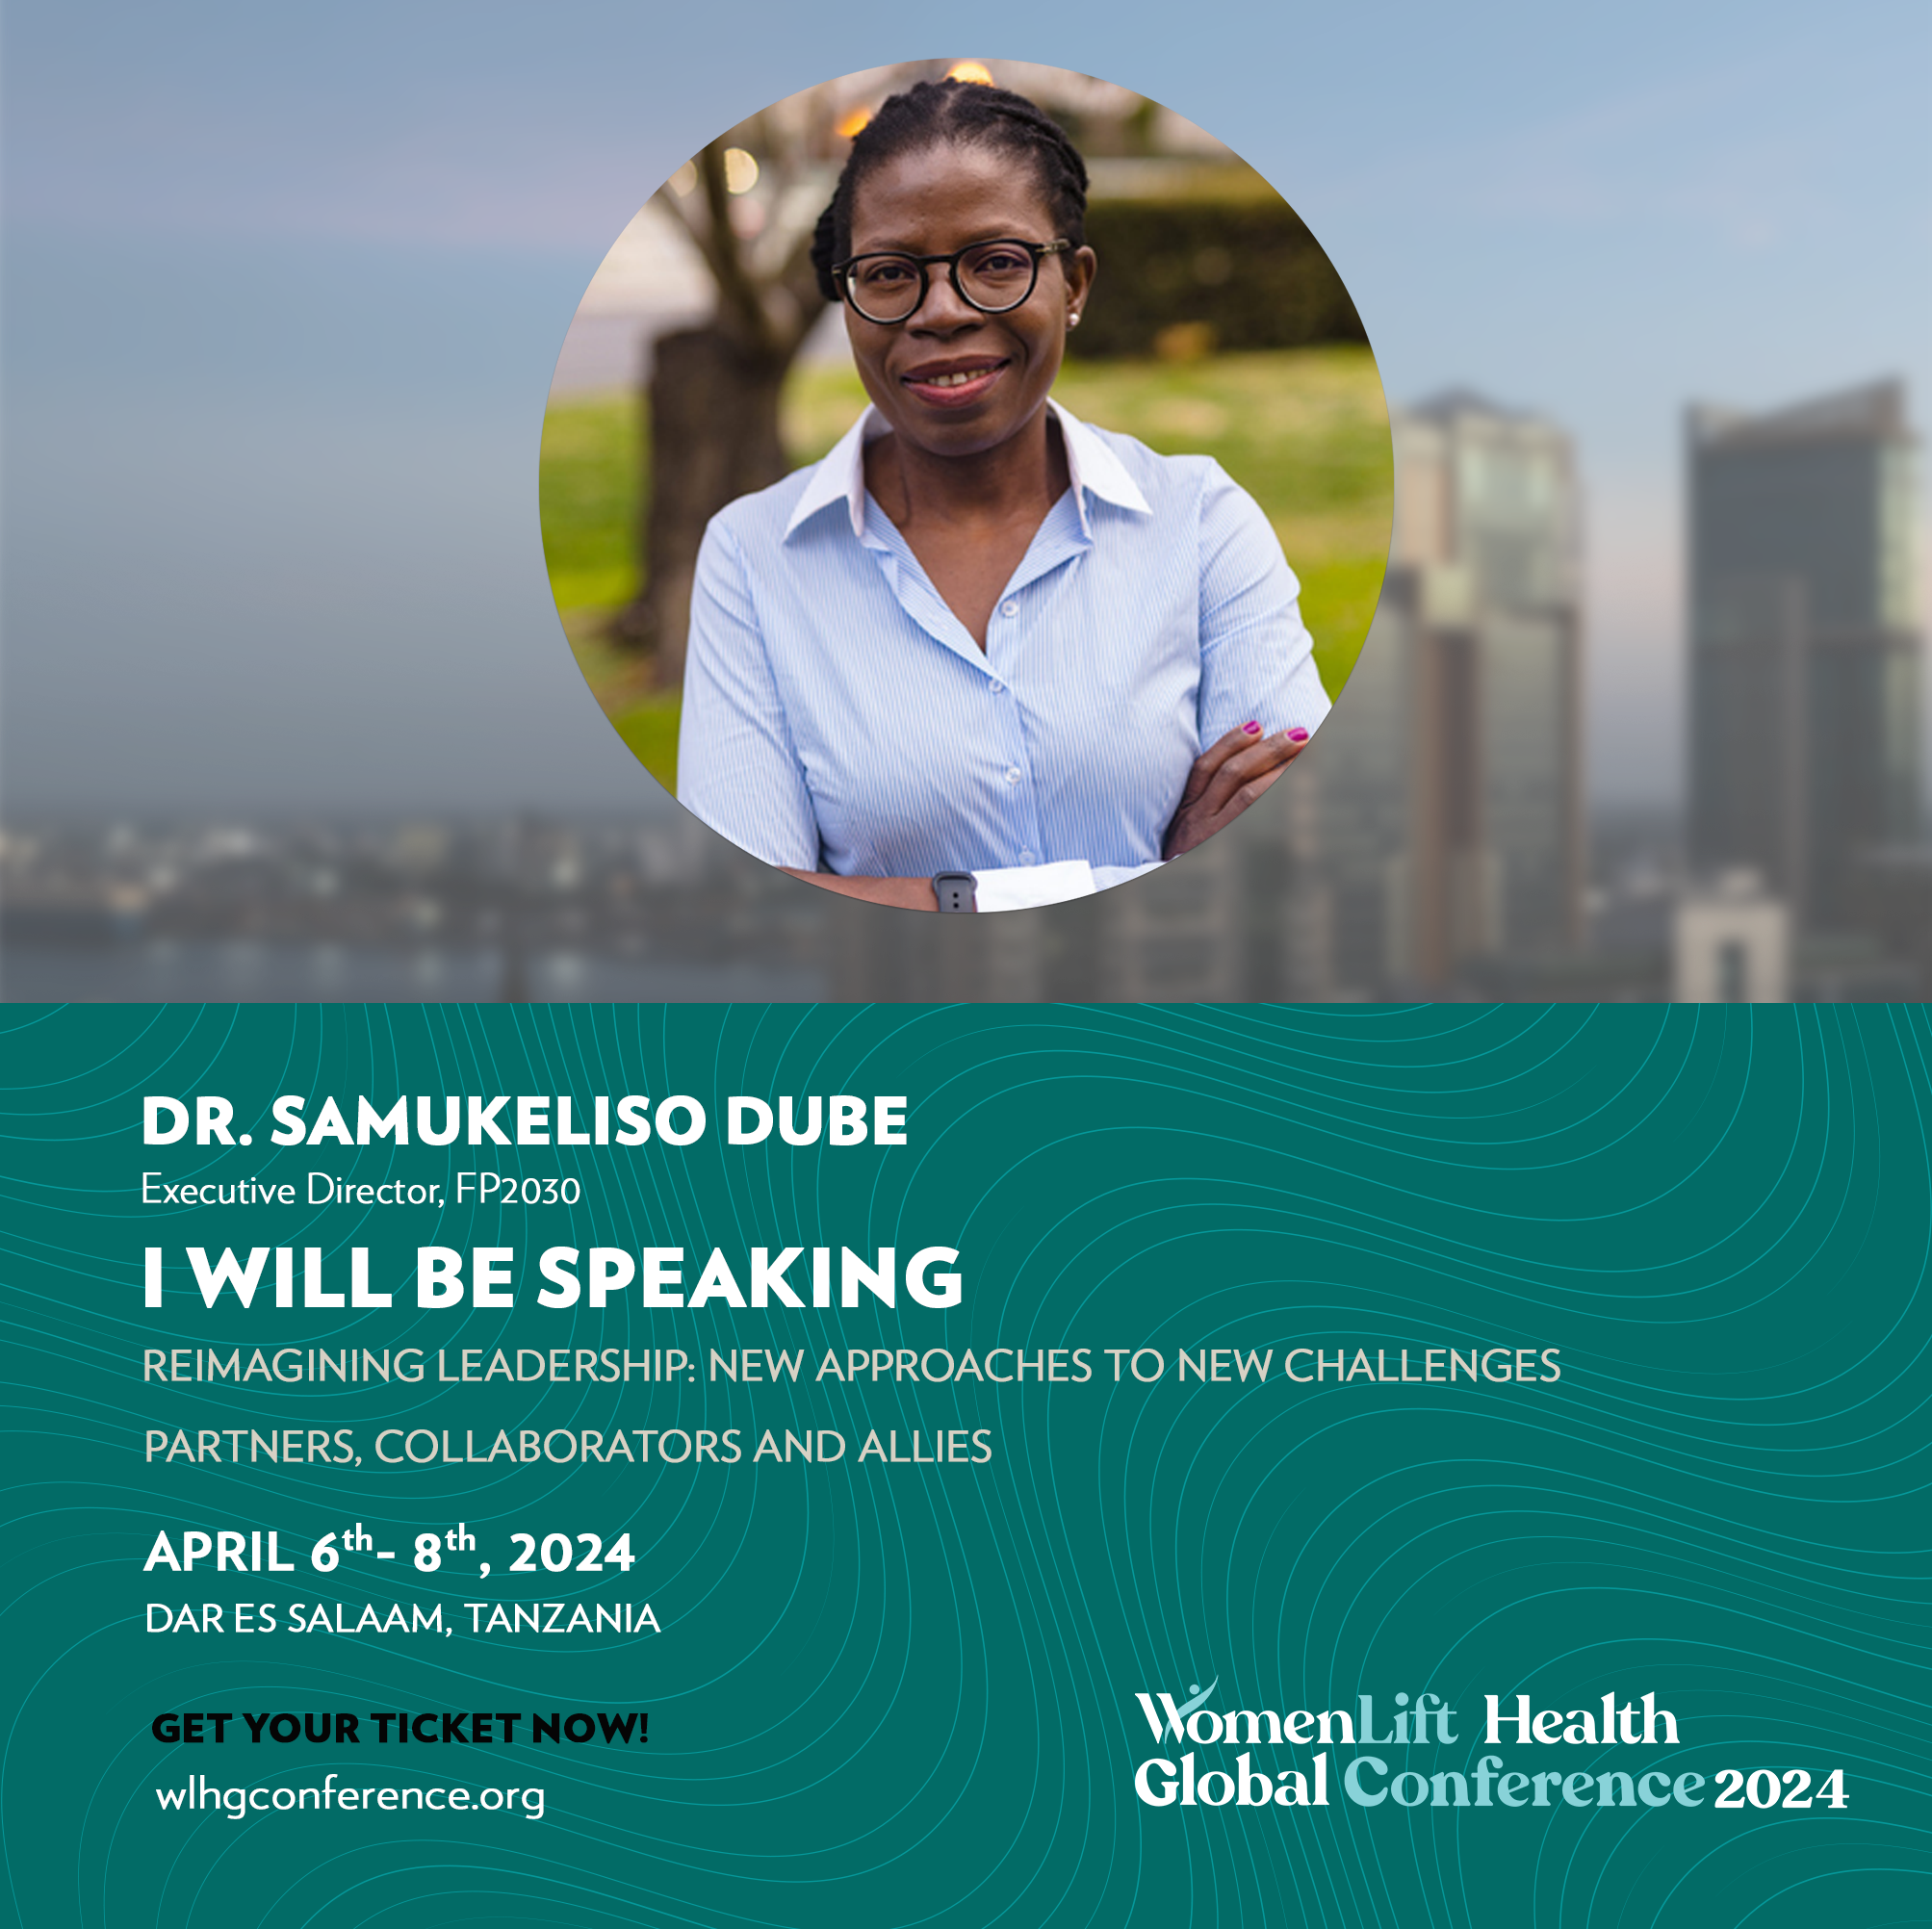 Dr. Samukeliso Dube will be speaking at the WomenLift Health Global Conference 2024